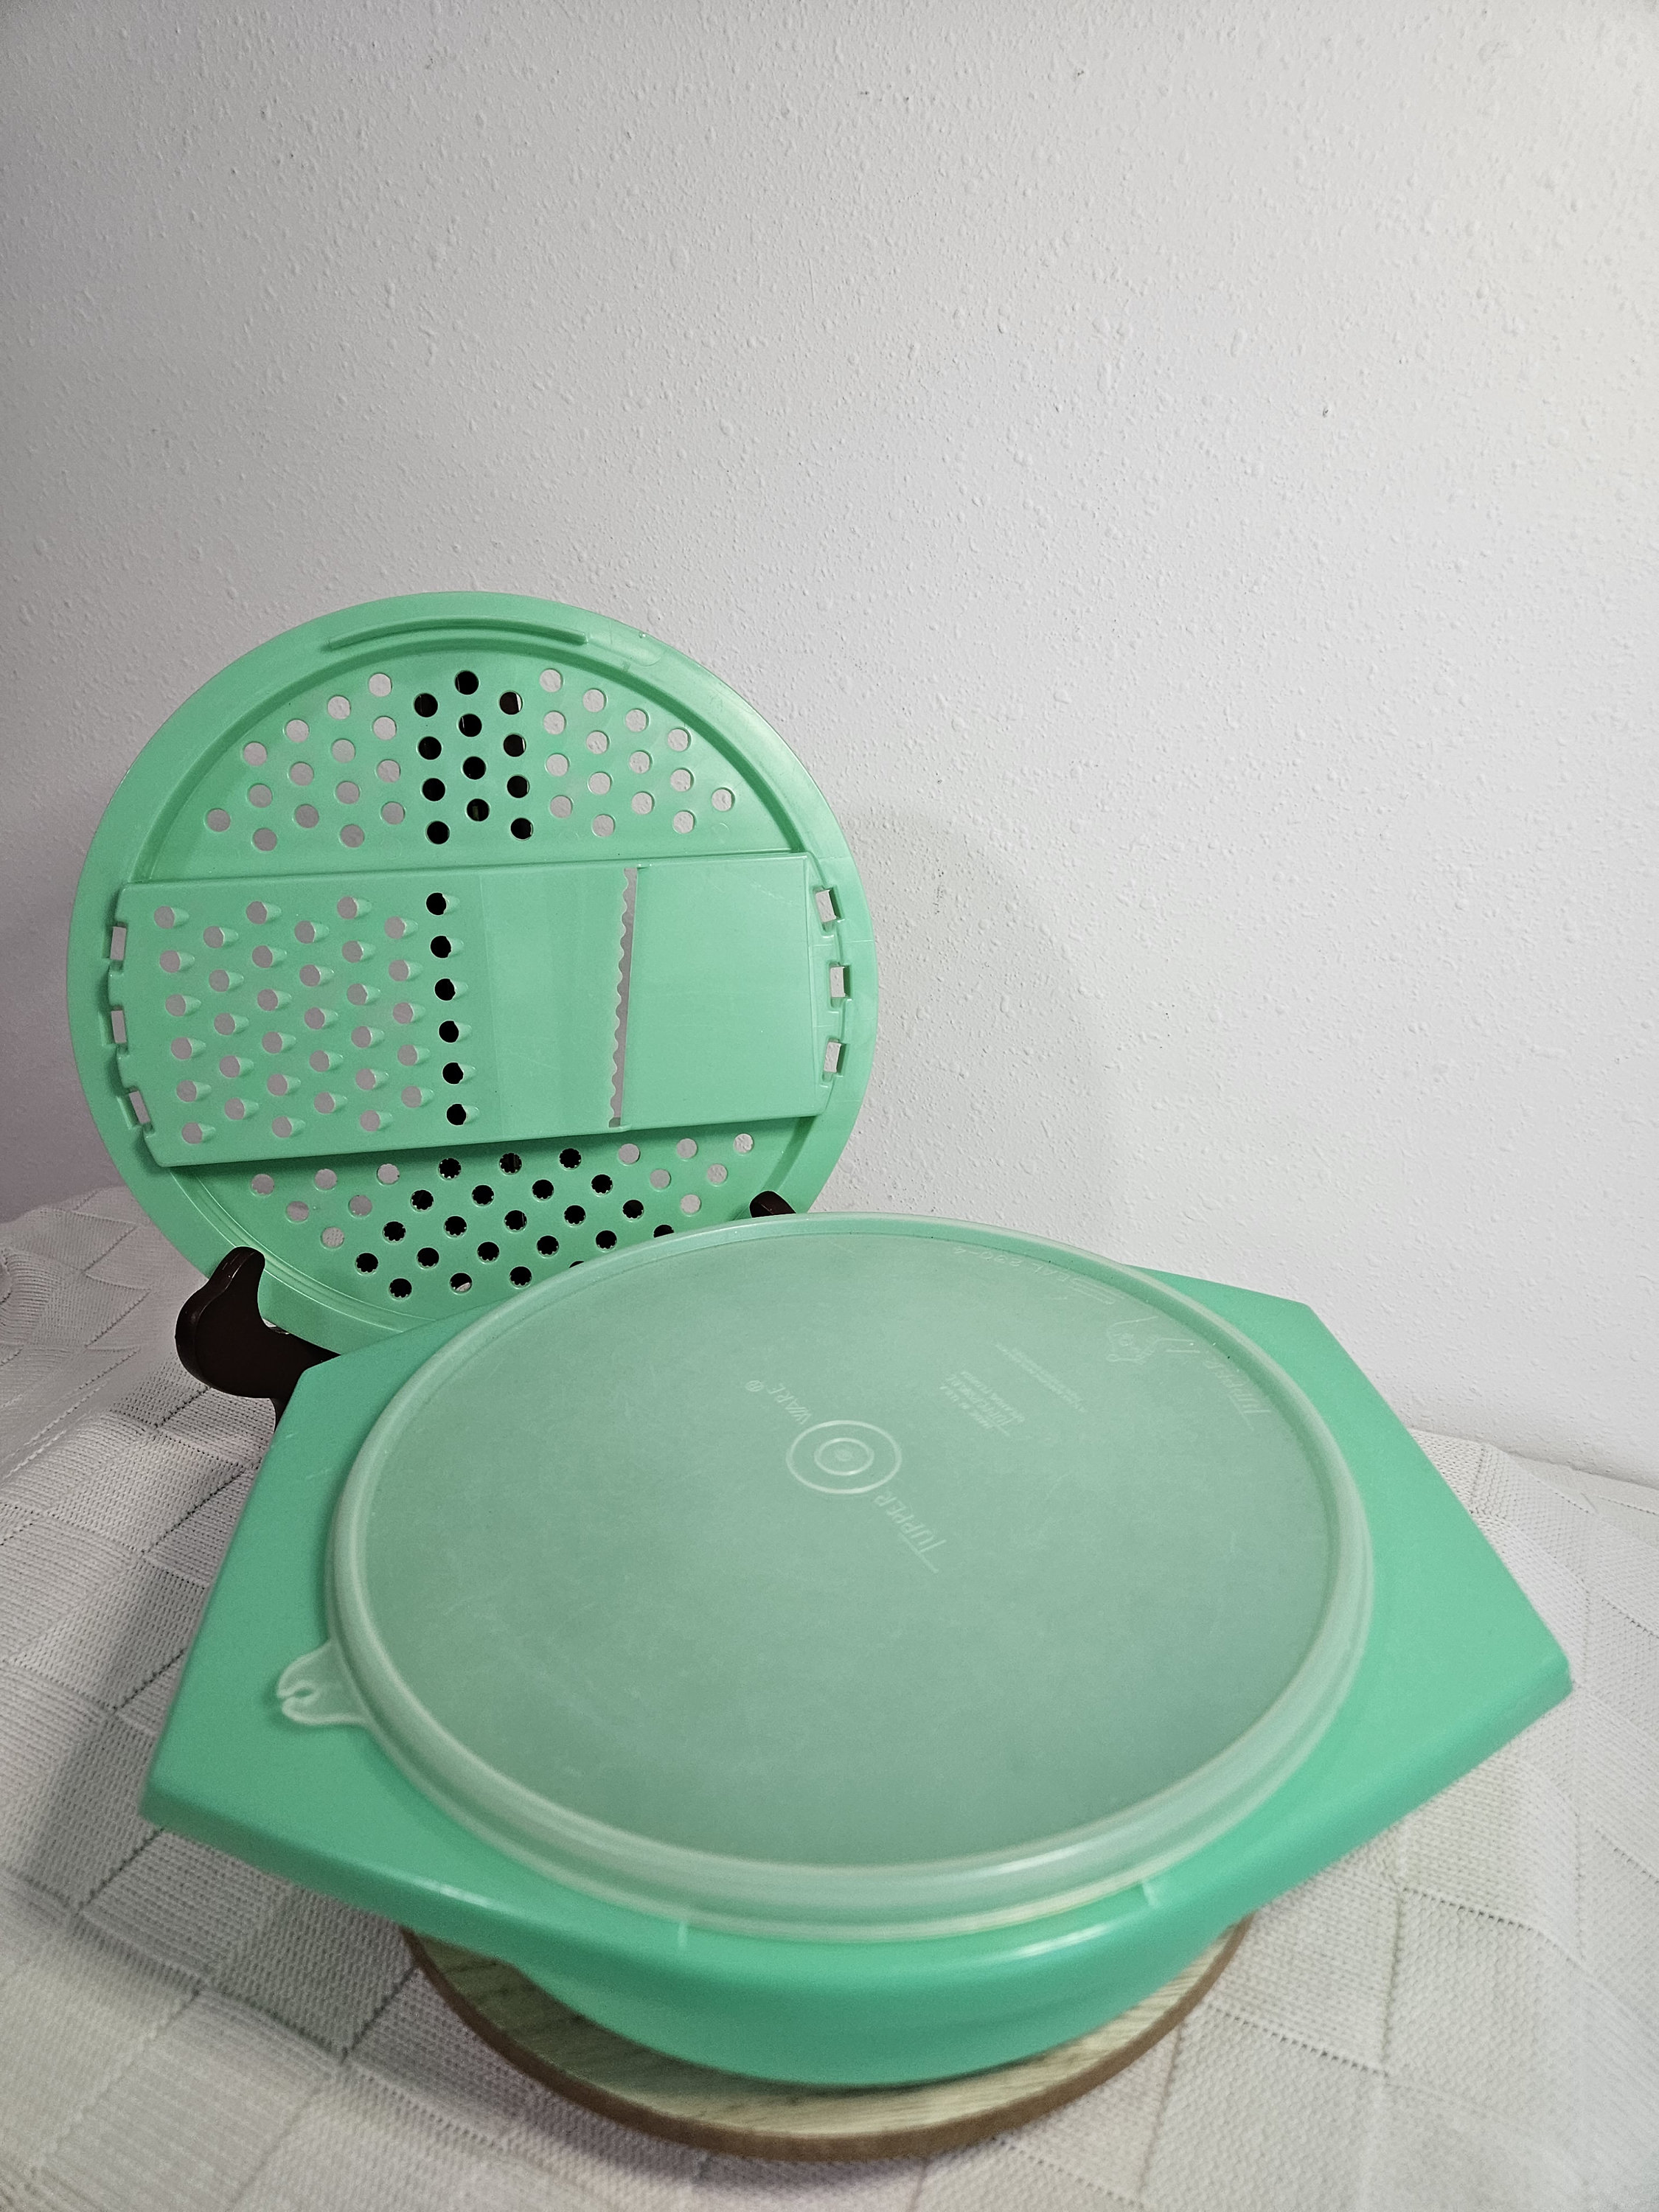 Vintage Green Tupperware Grater complete with lid